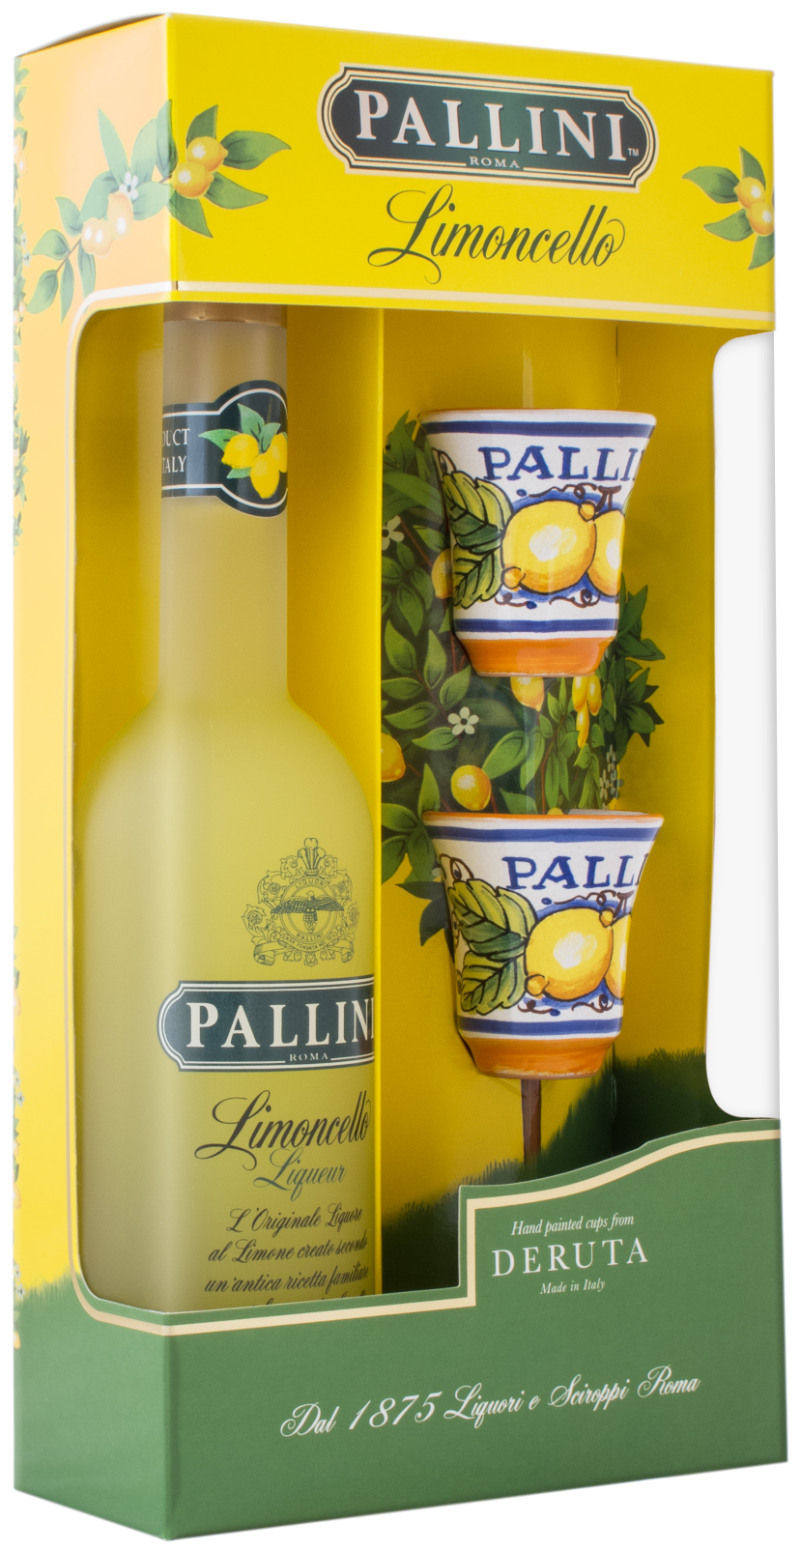 Giftpack 26% Pallini 50 - vol cl Limoncello